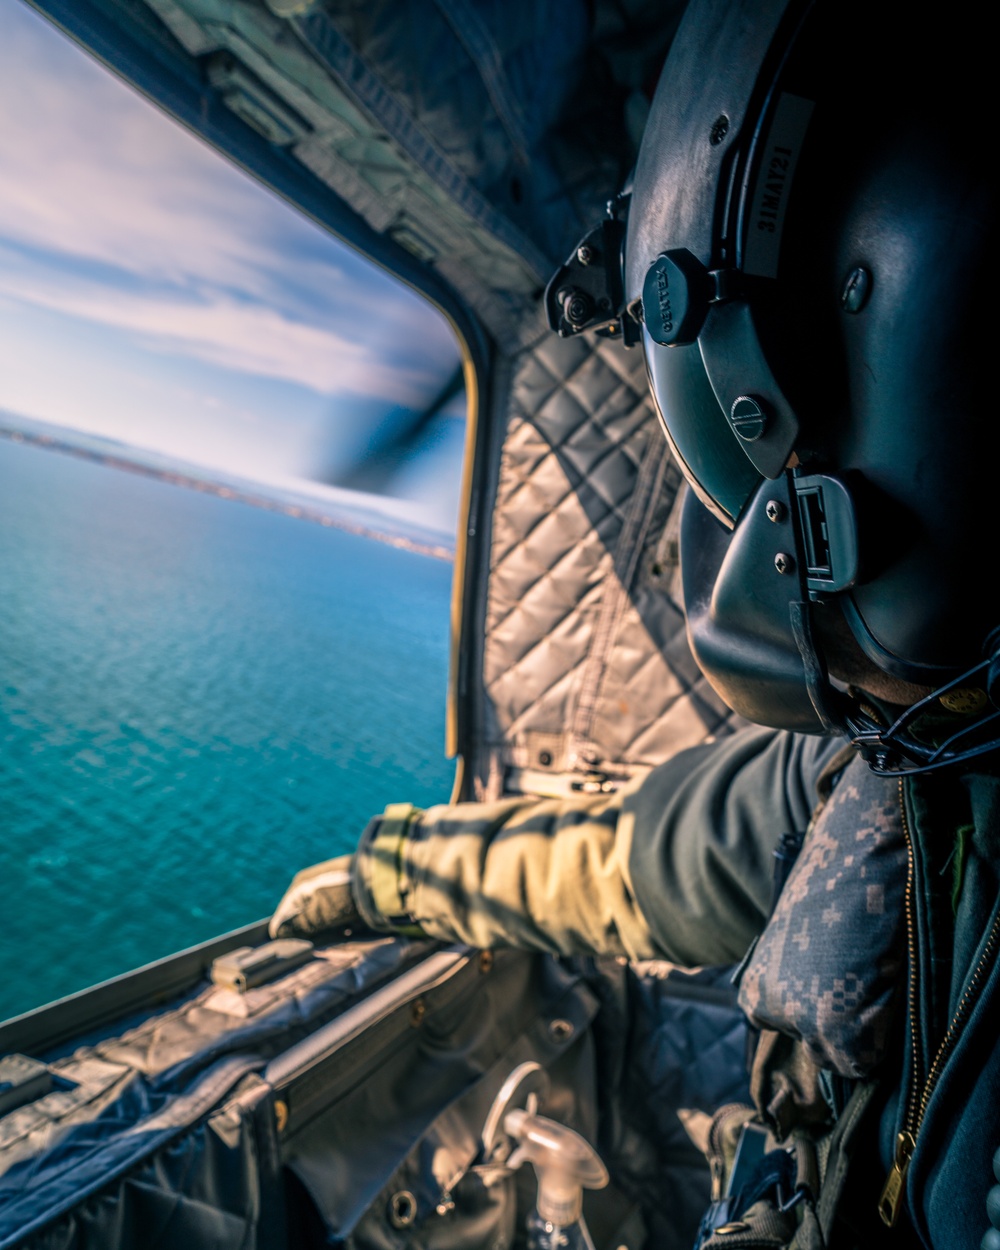 Over the blue waters of the Black Sea: 12th CAB qualifies crews for maritime operations